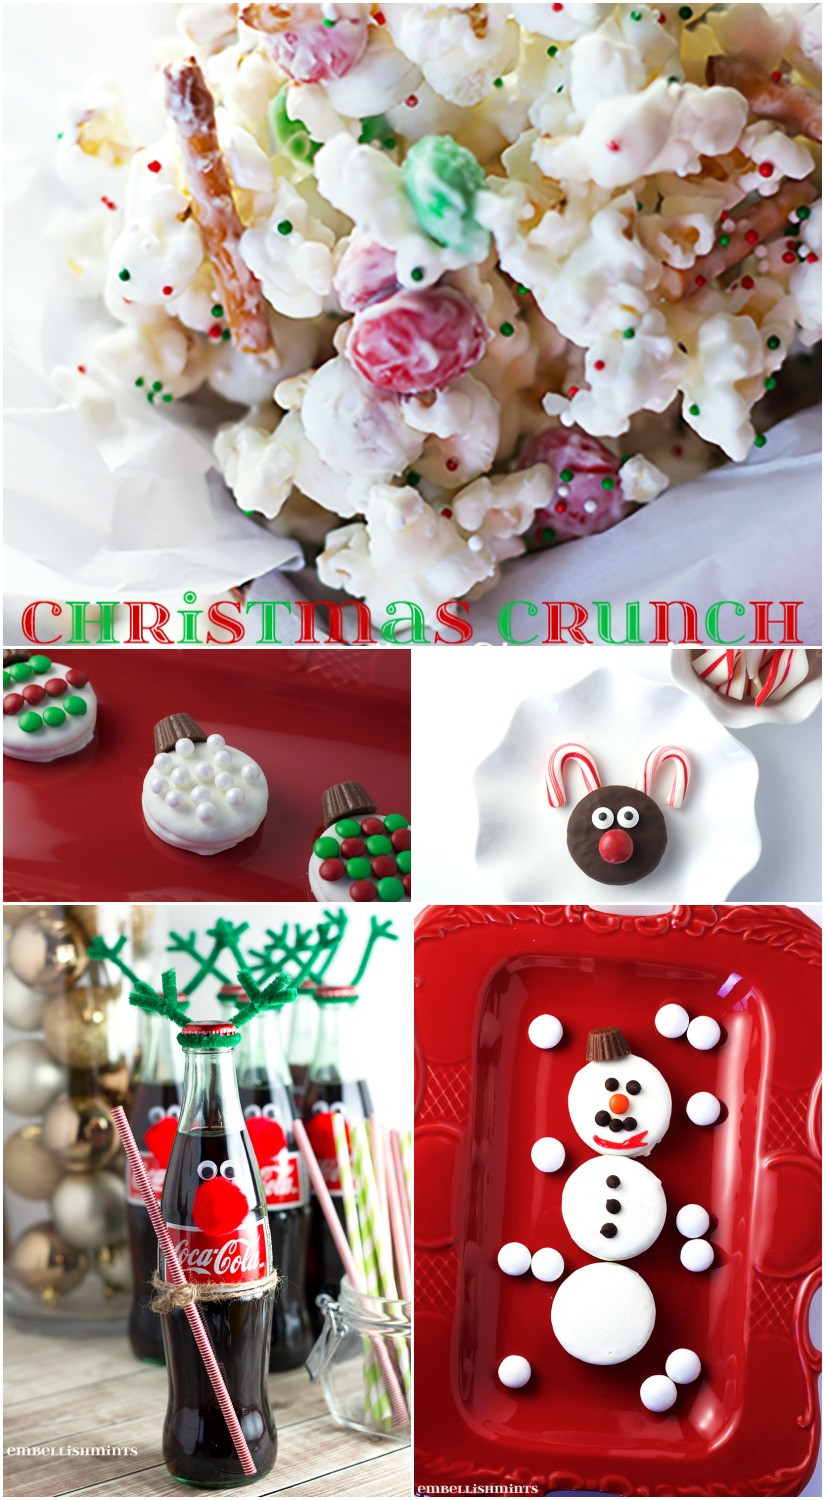 Children'S Christmas Party Food Ideas
 Christmas Party Food Ideas For Kids Embellishmints